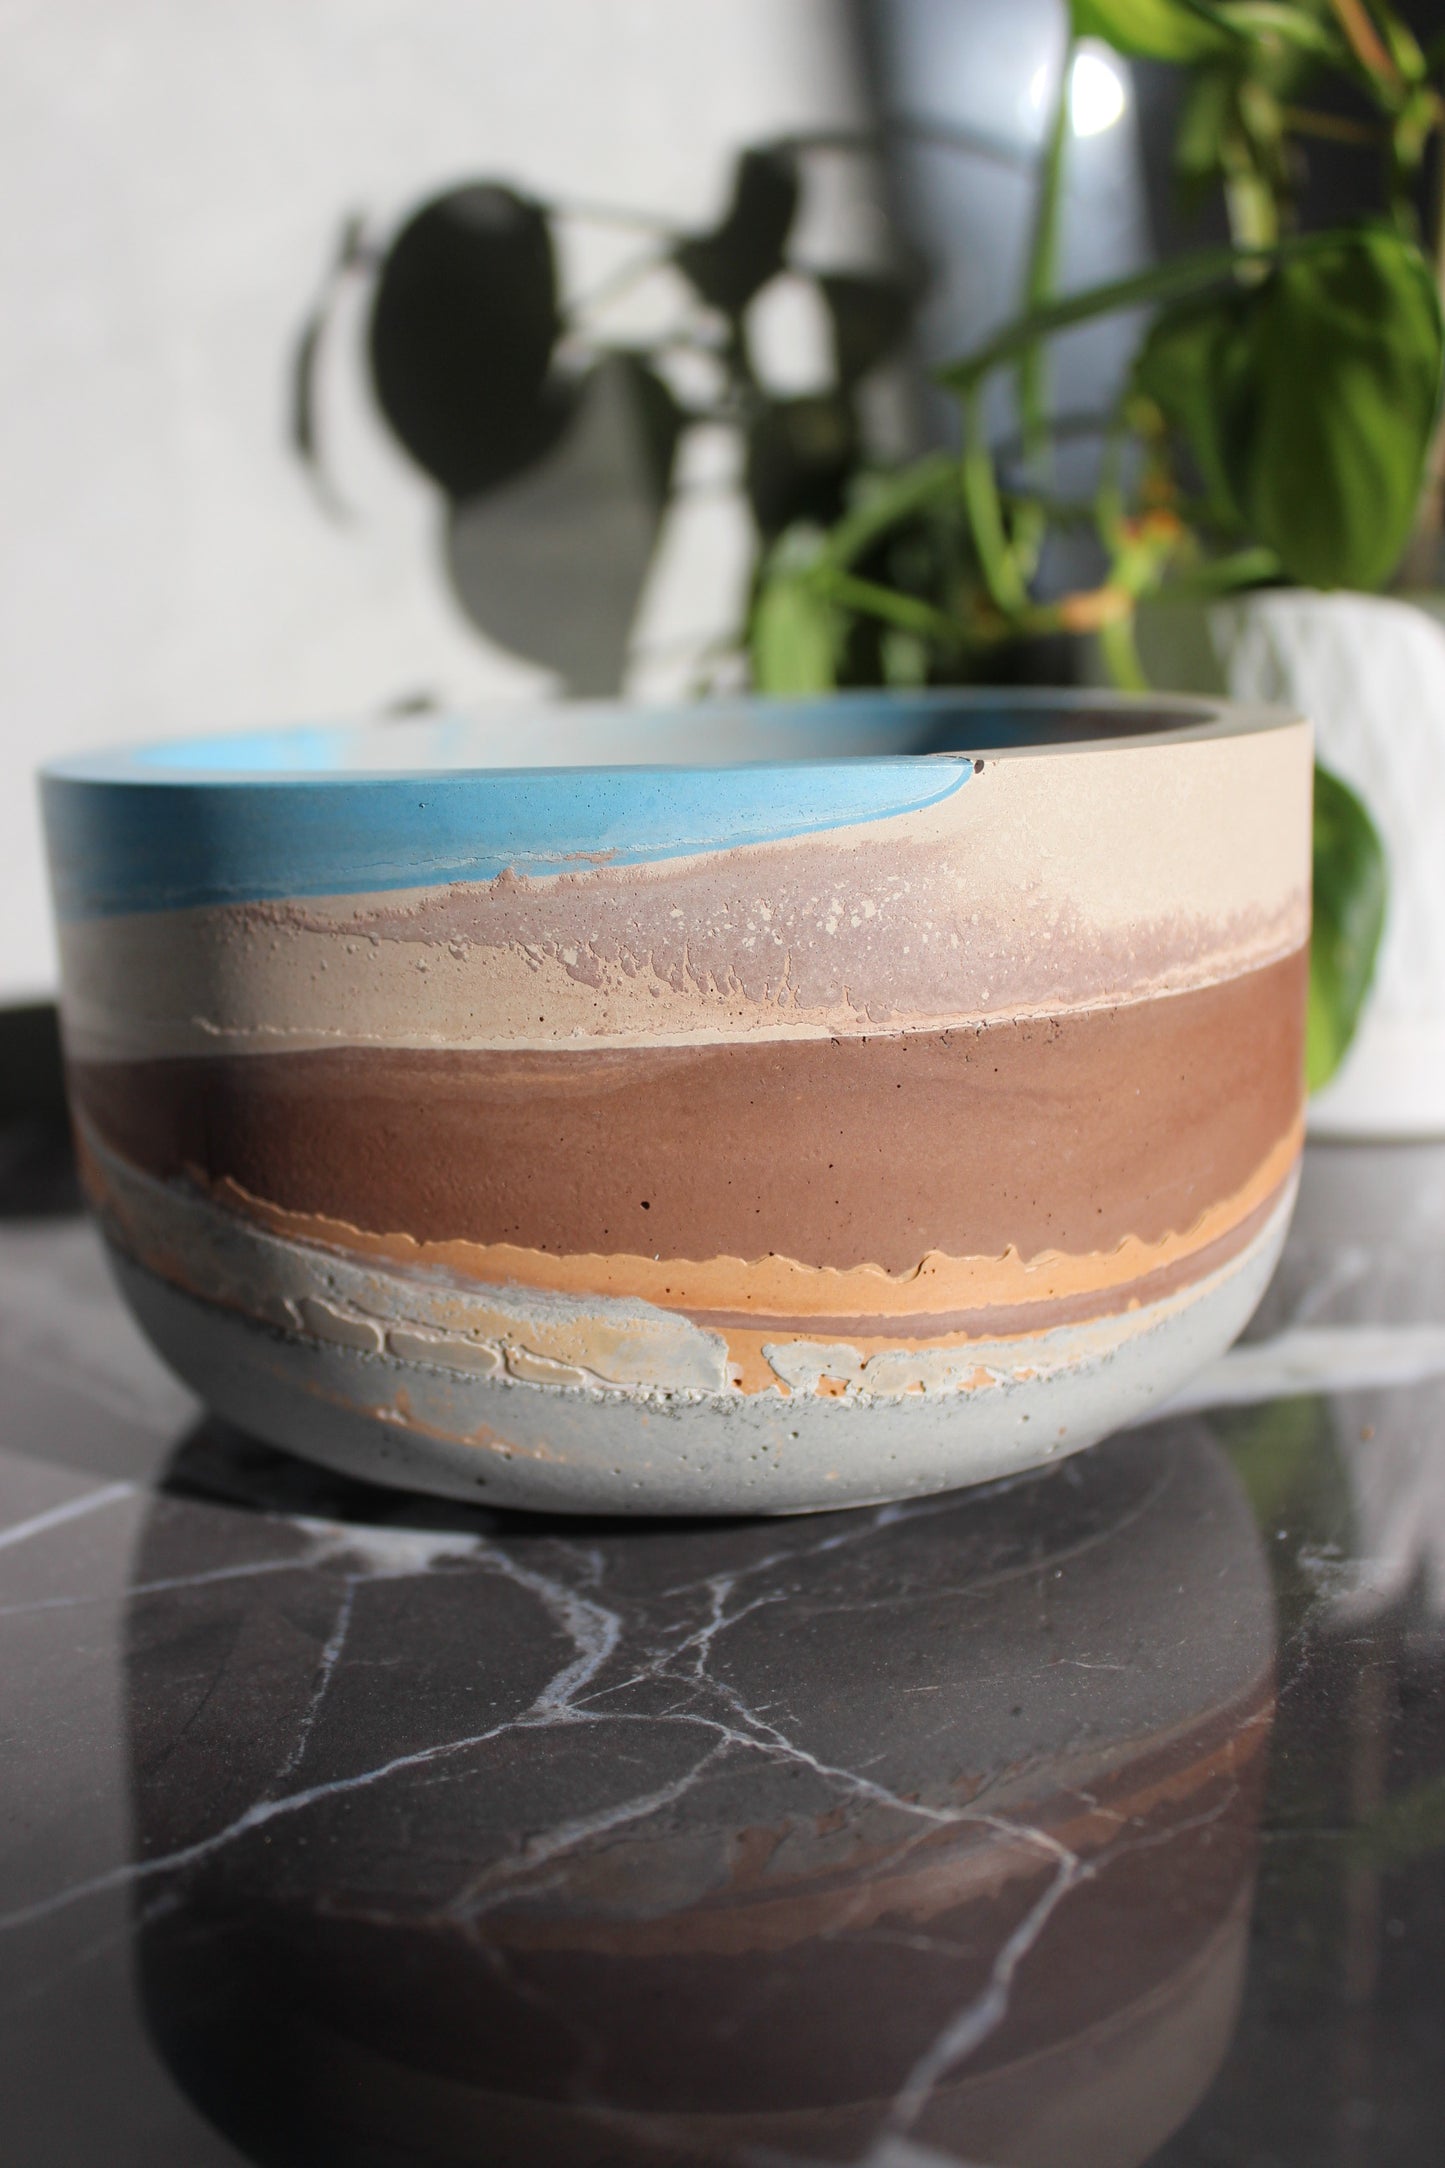 Desert Skies Collection - Hand Poured Bowl - Medium | Tons of Soul